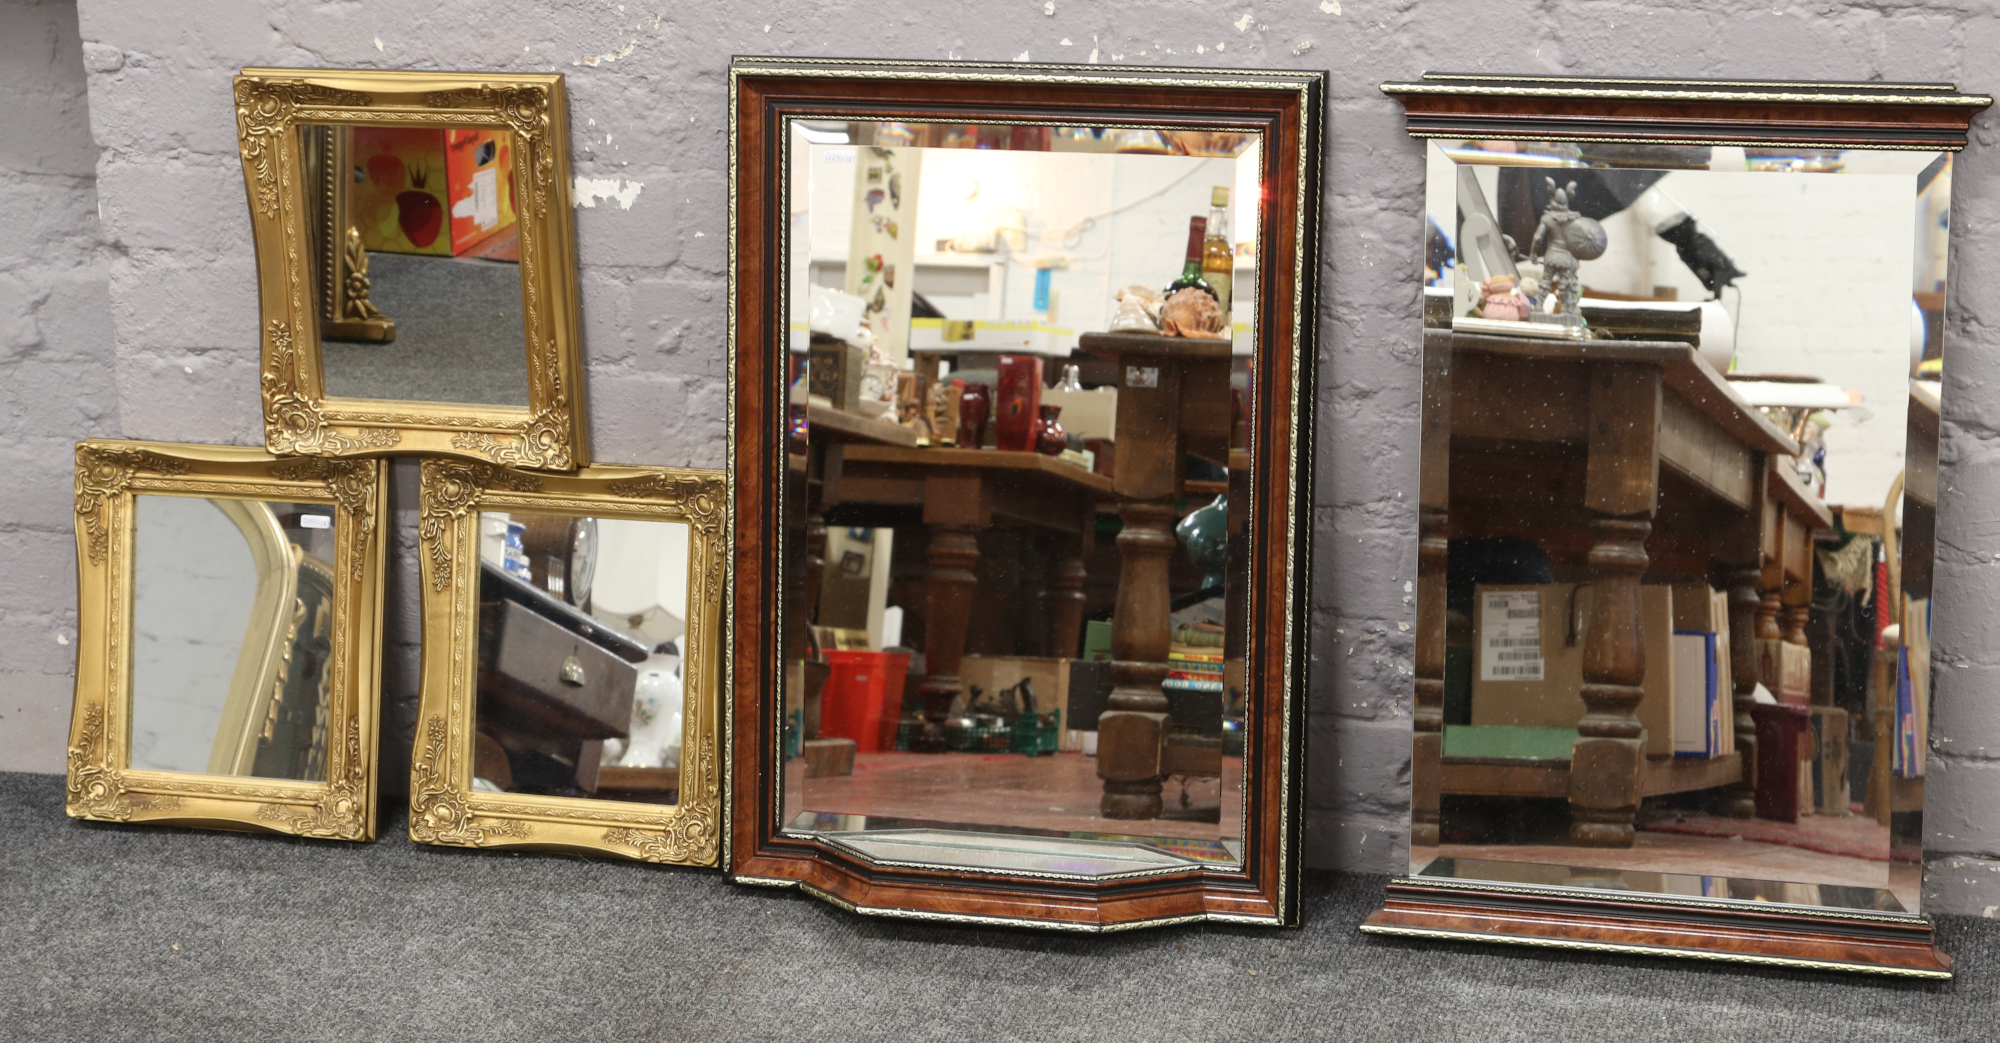 Two mahogany bevel edge wall mirrors, one with mirrored shelf, along with three gilt framed mirrors.